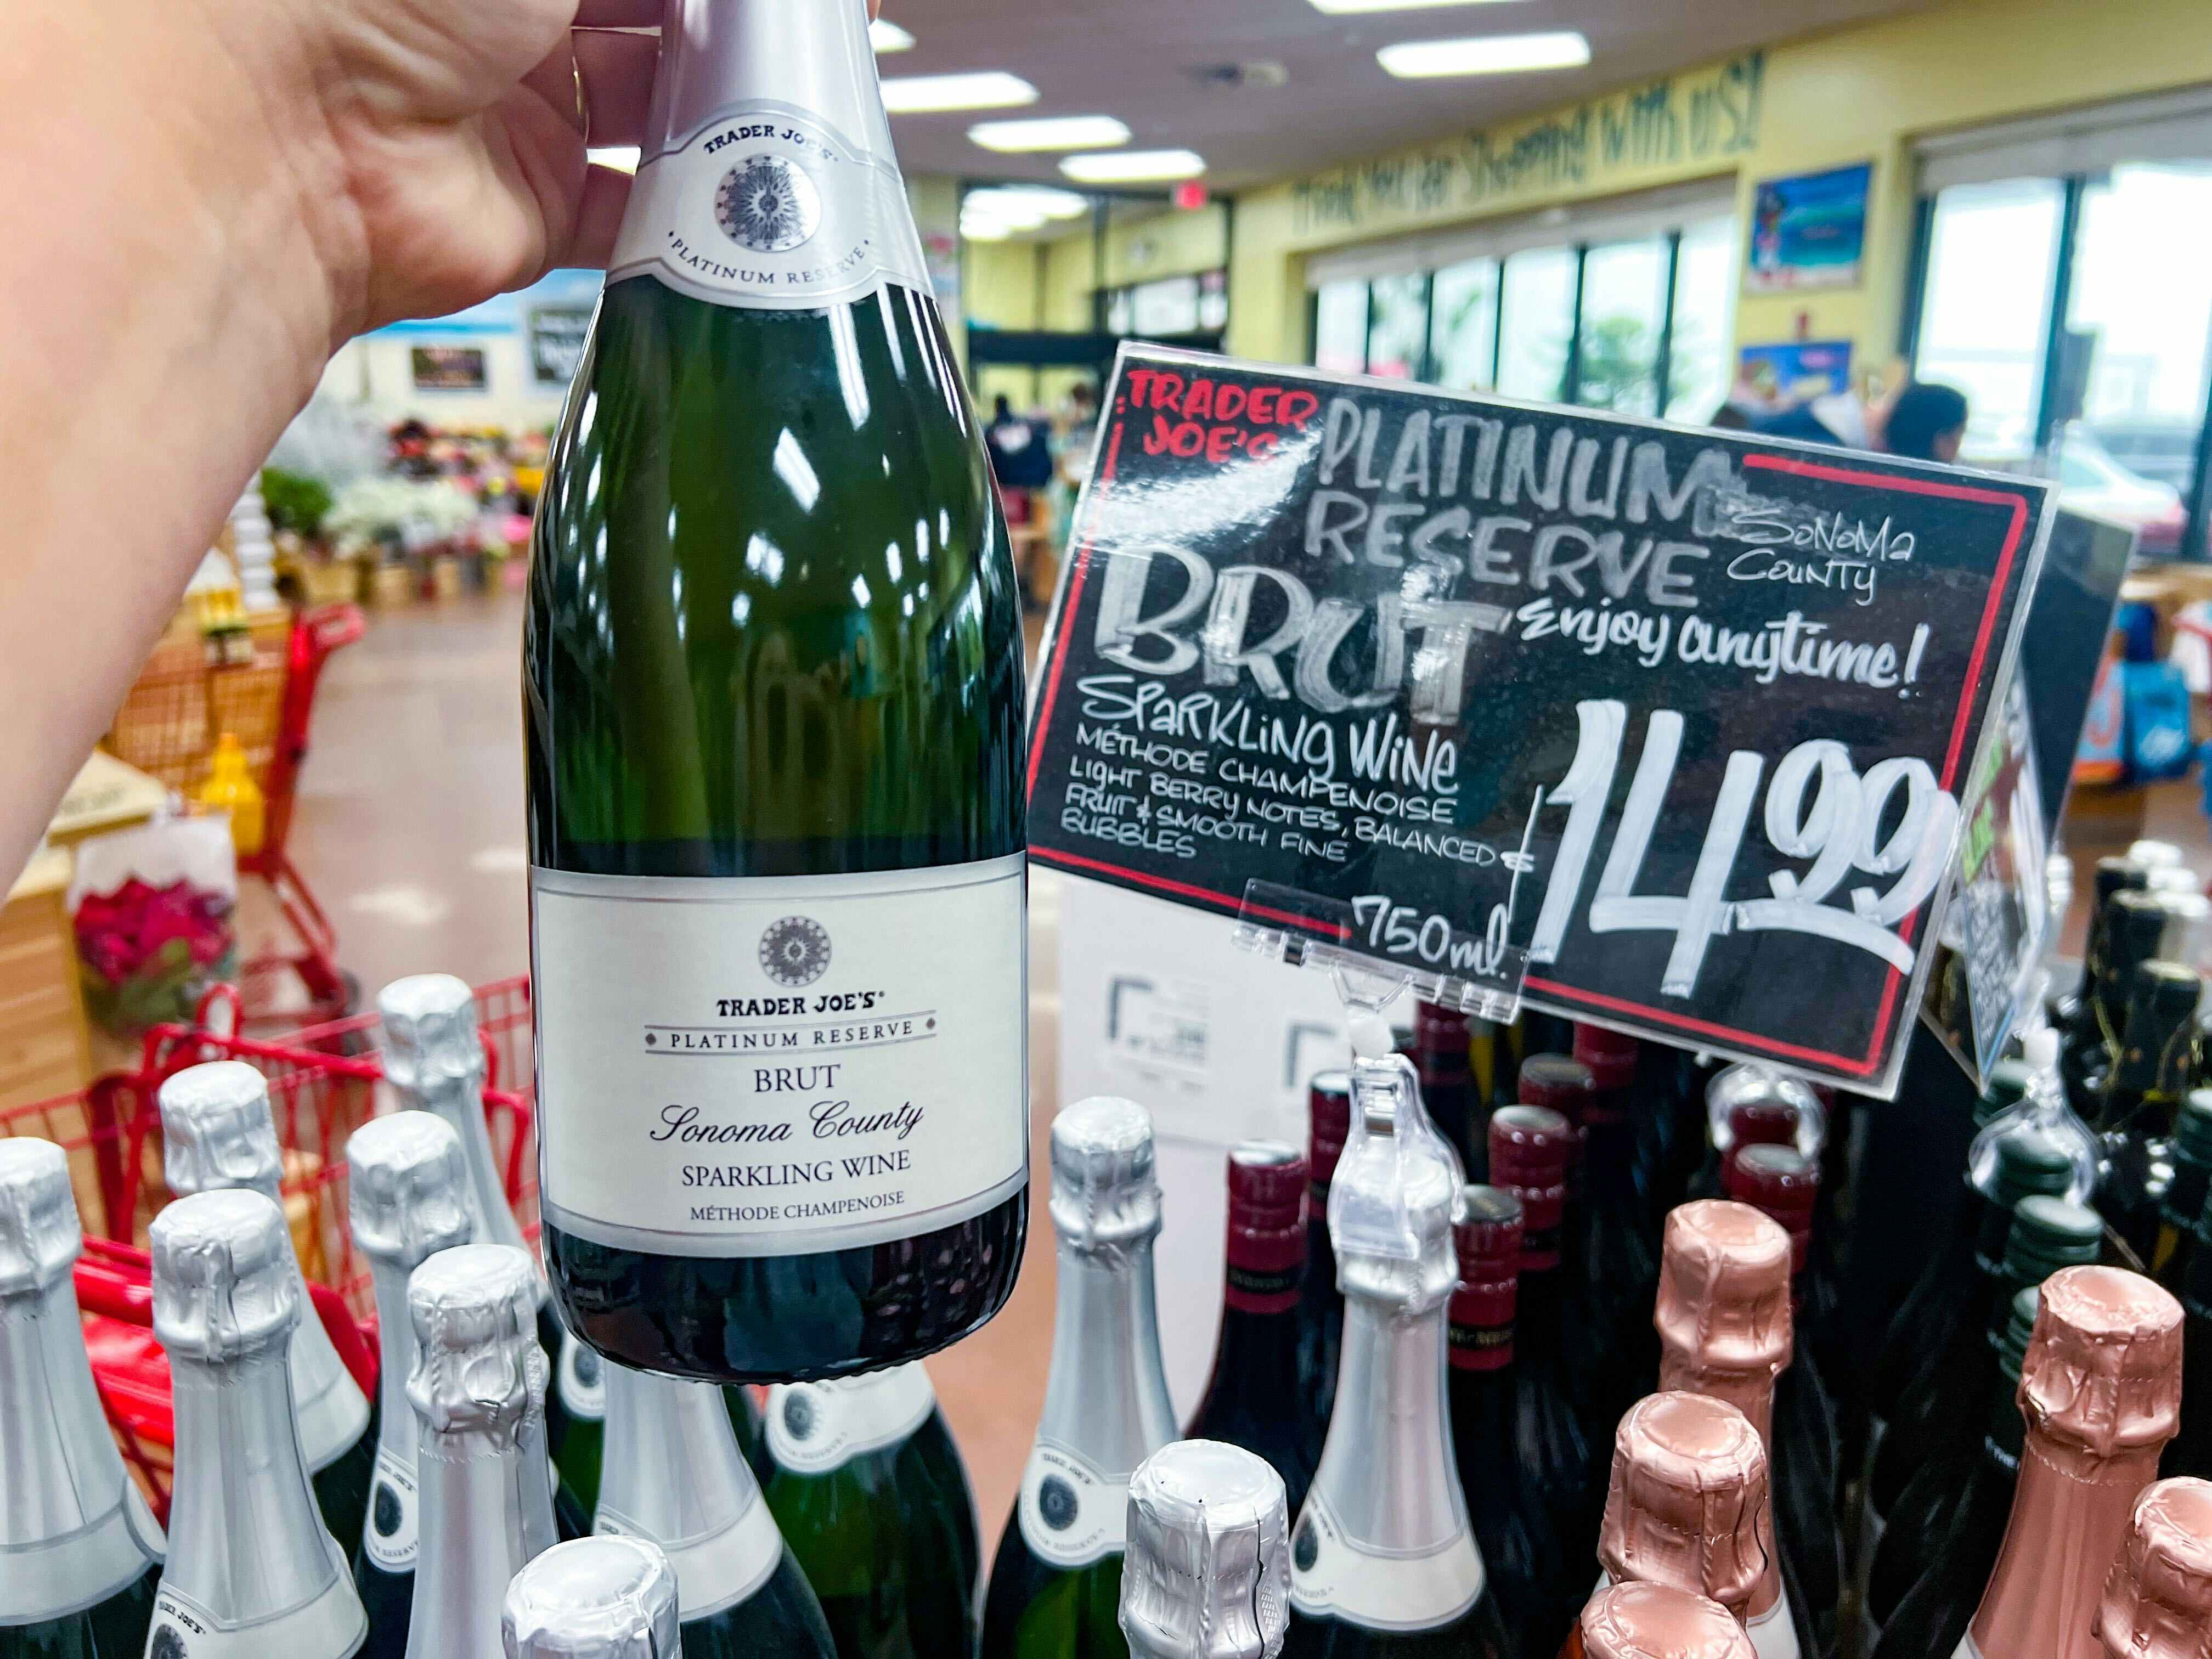 bottle of Trader Joe's Platinum Reserve Sonoma County Brut being held up in front of sign